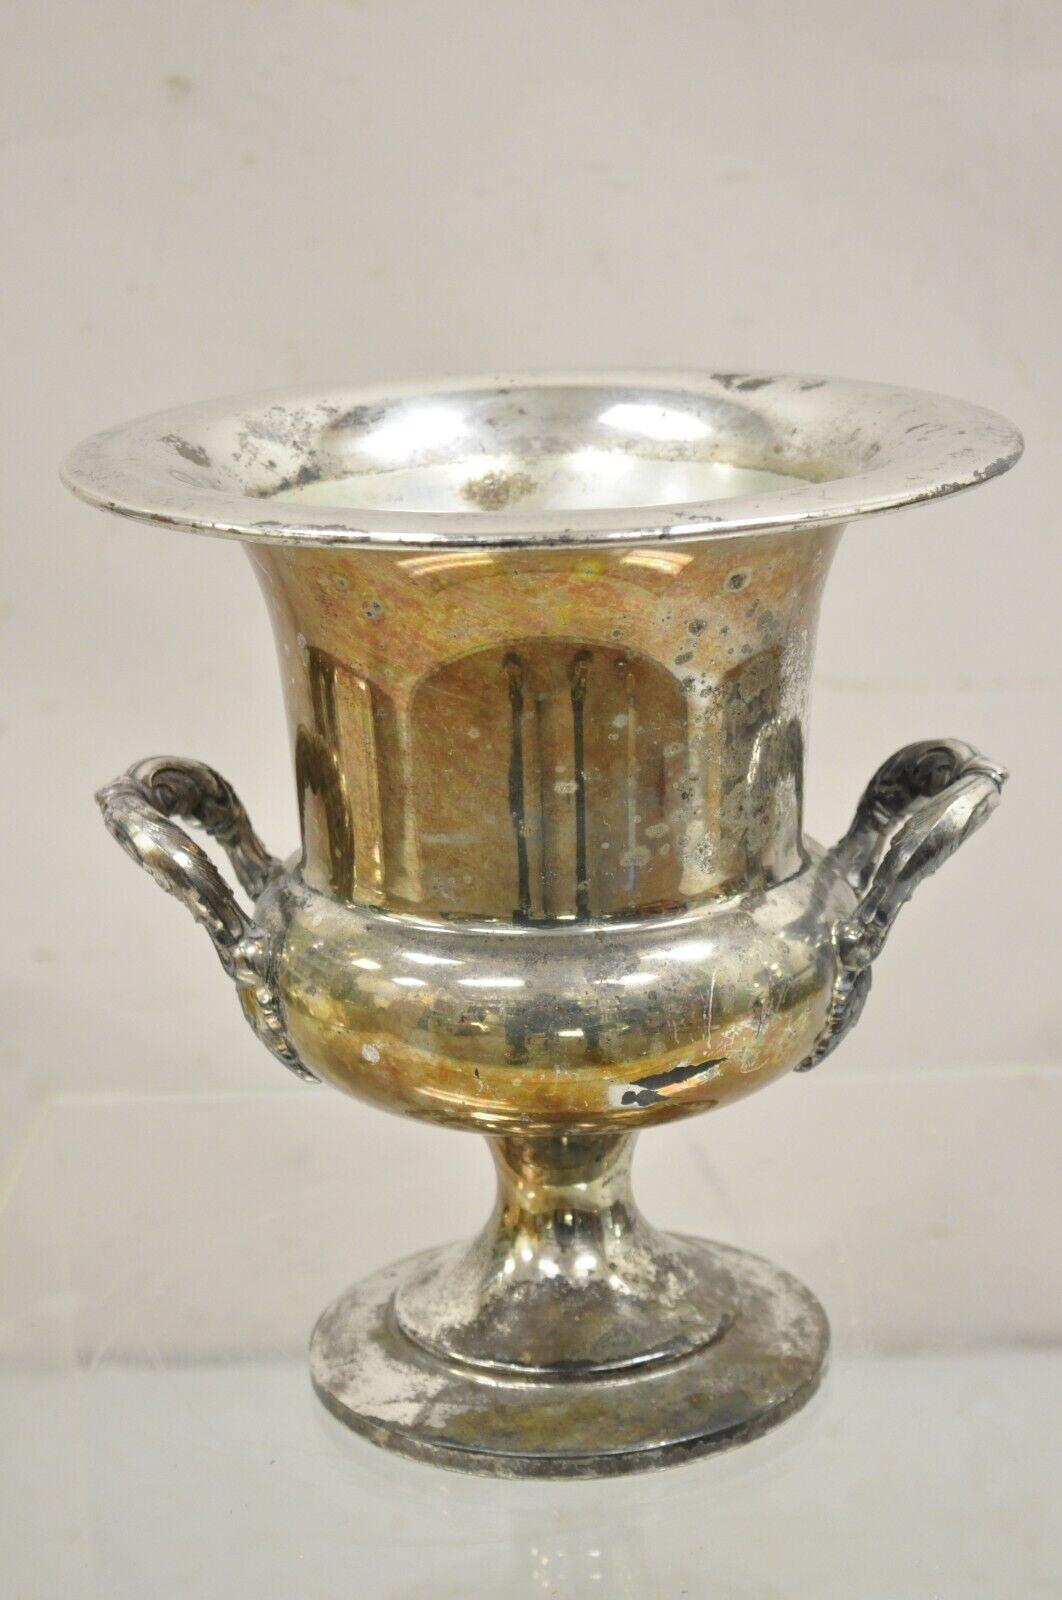 Vintage Trophy Cup Worn Silver Plated Champagne Chiller Ice Bucket by Bristol For Sale 4